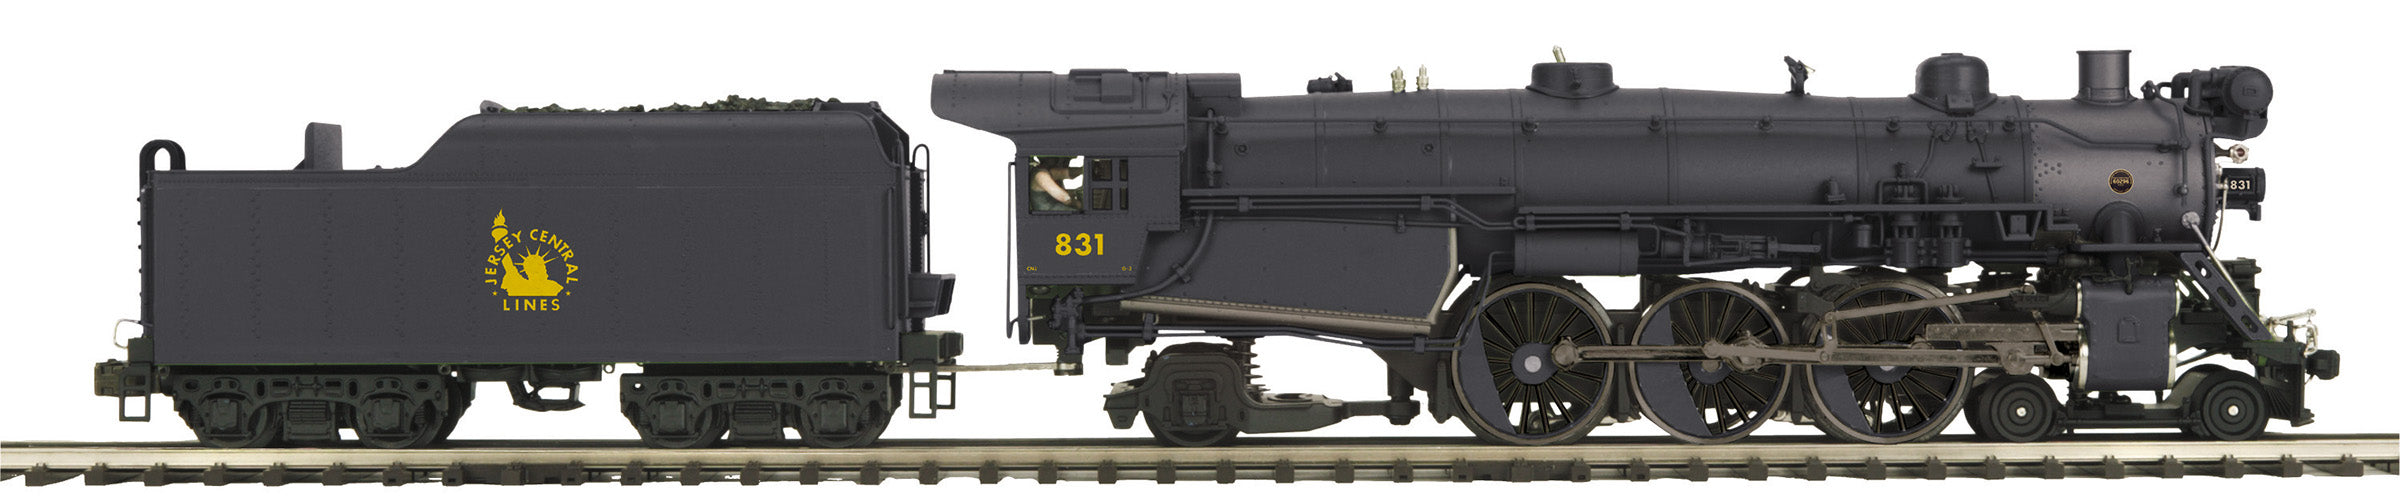 MTH 20-3925-1 - 4-6-2 P47 Baldwin Pacific Steam Engine "Jersey Central" #831 w/ PS3 (Black)